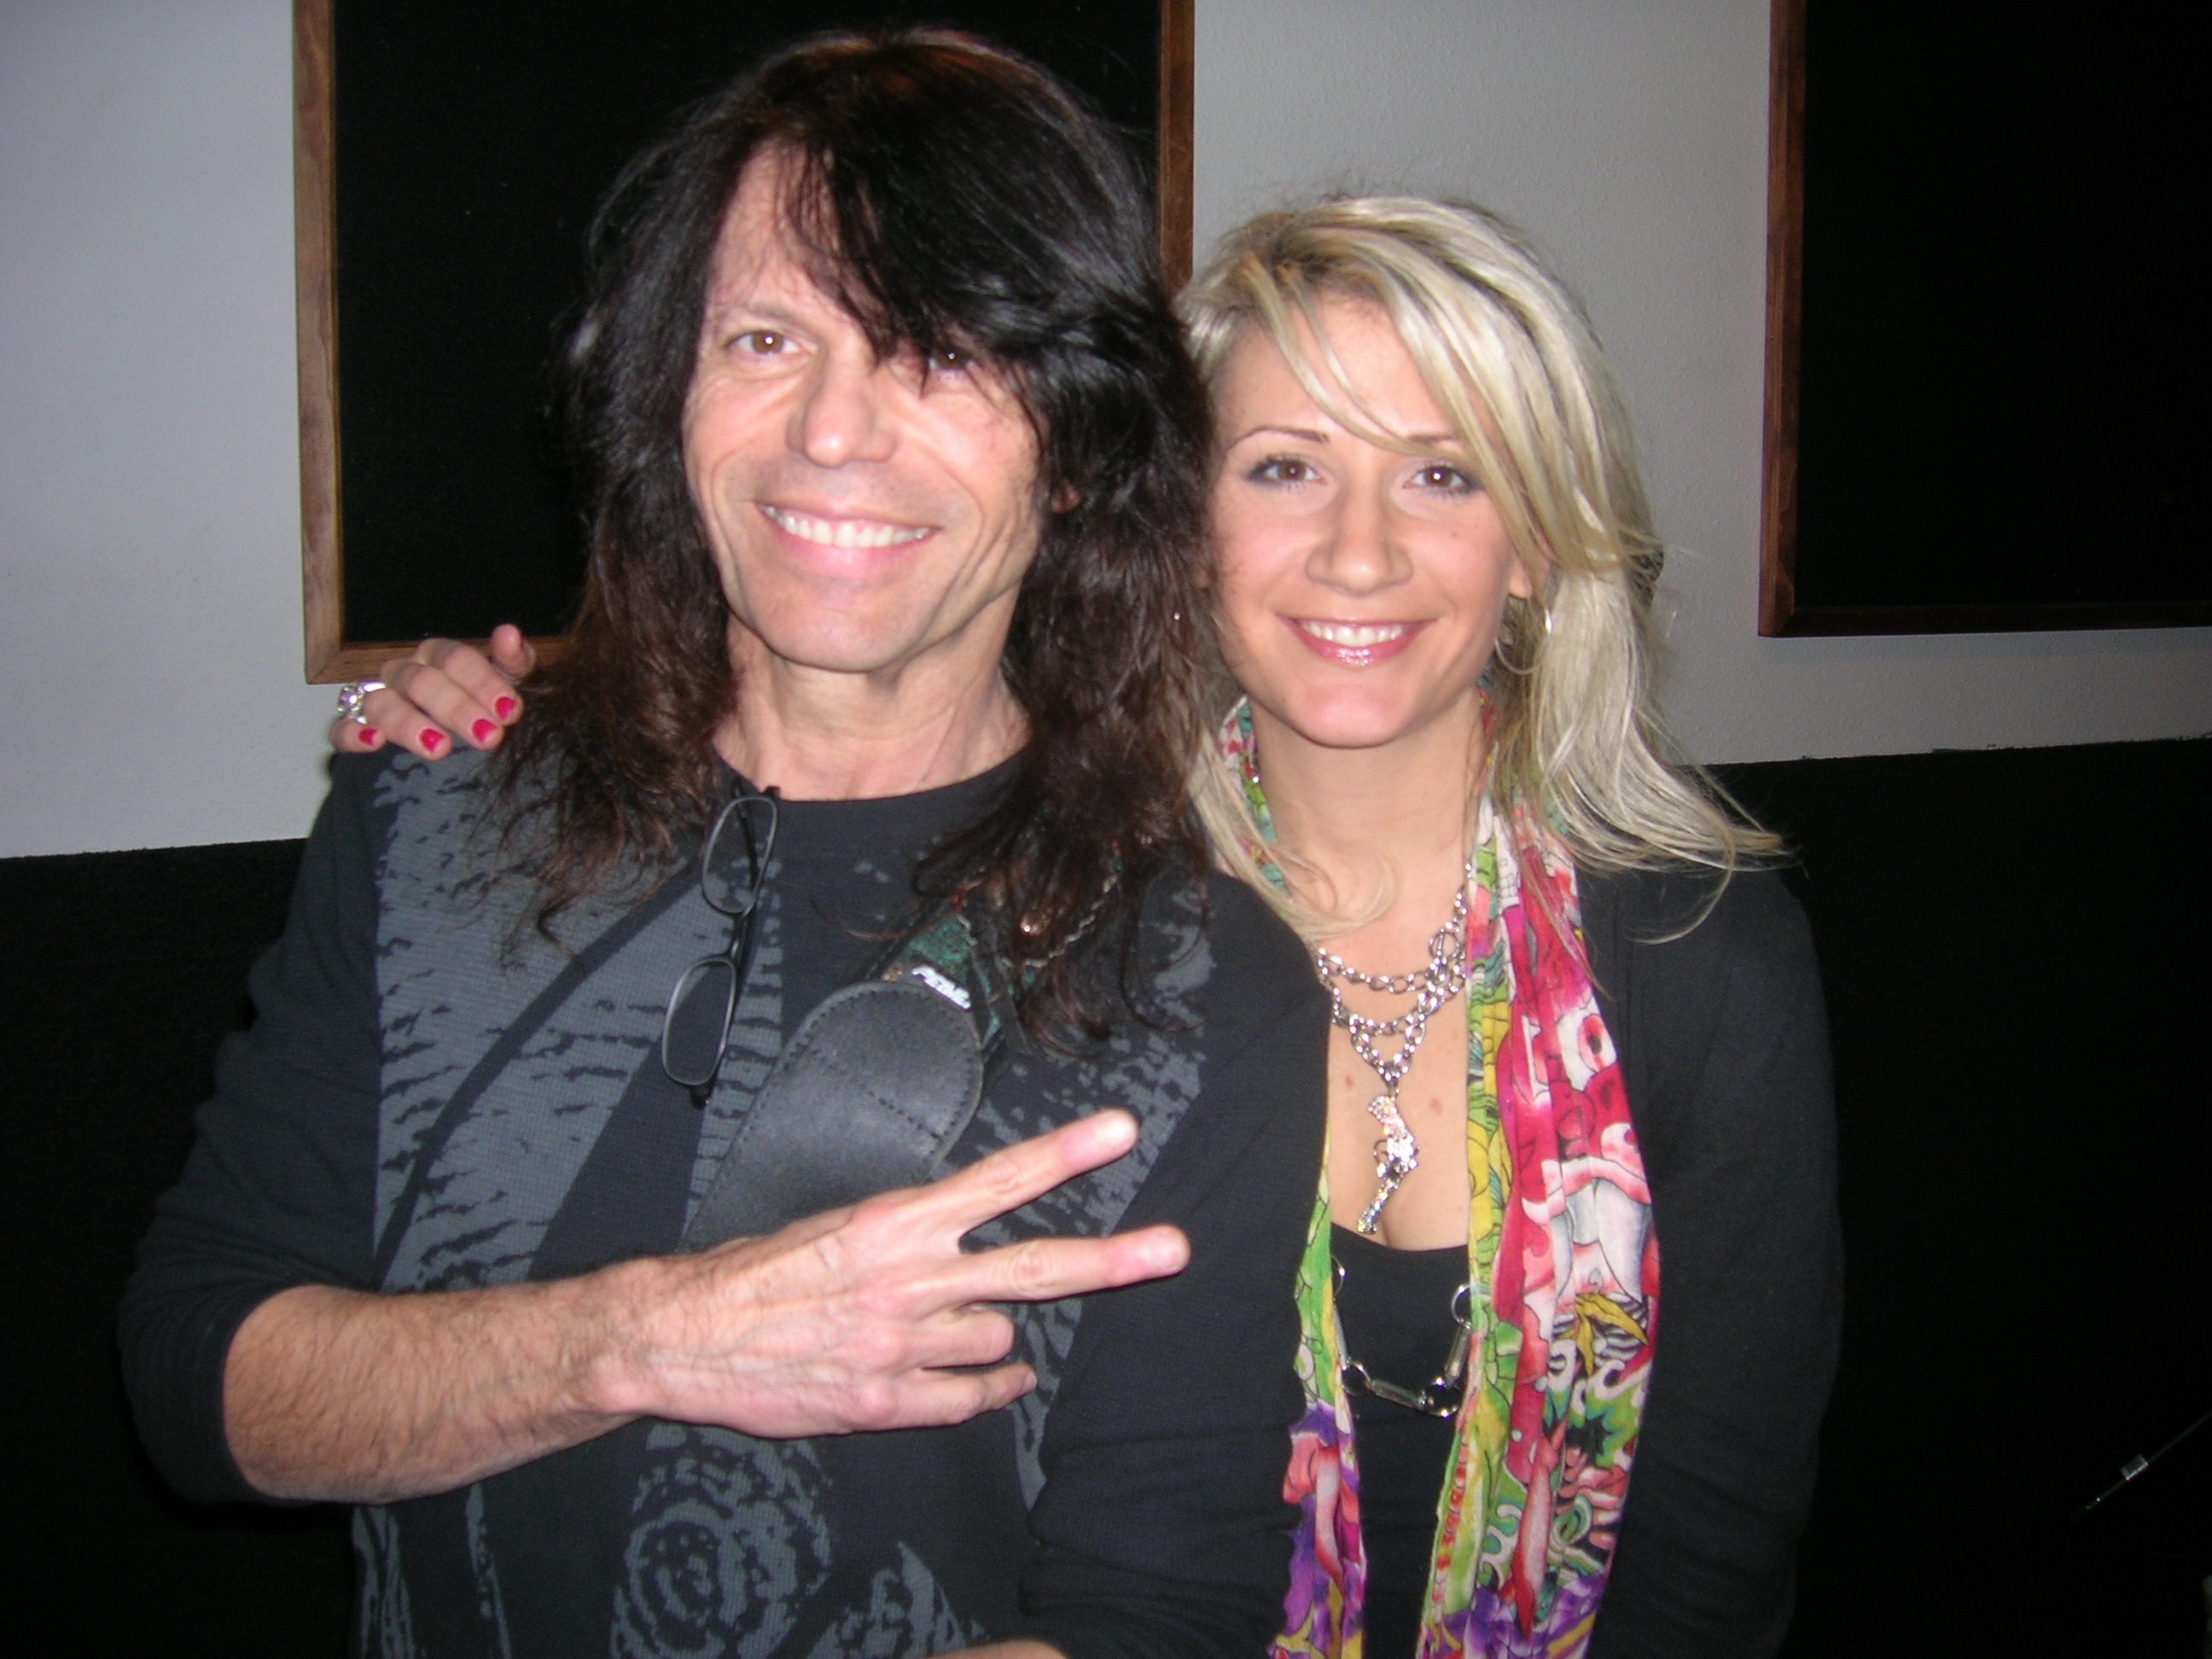 Rudy Sarzo, Rock Metal Bassist, Pt. 1 – From Childhood and Early Bands to Meeting Ozzy